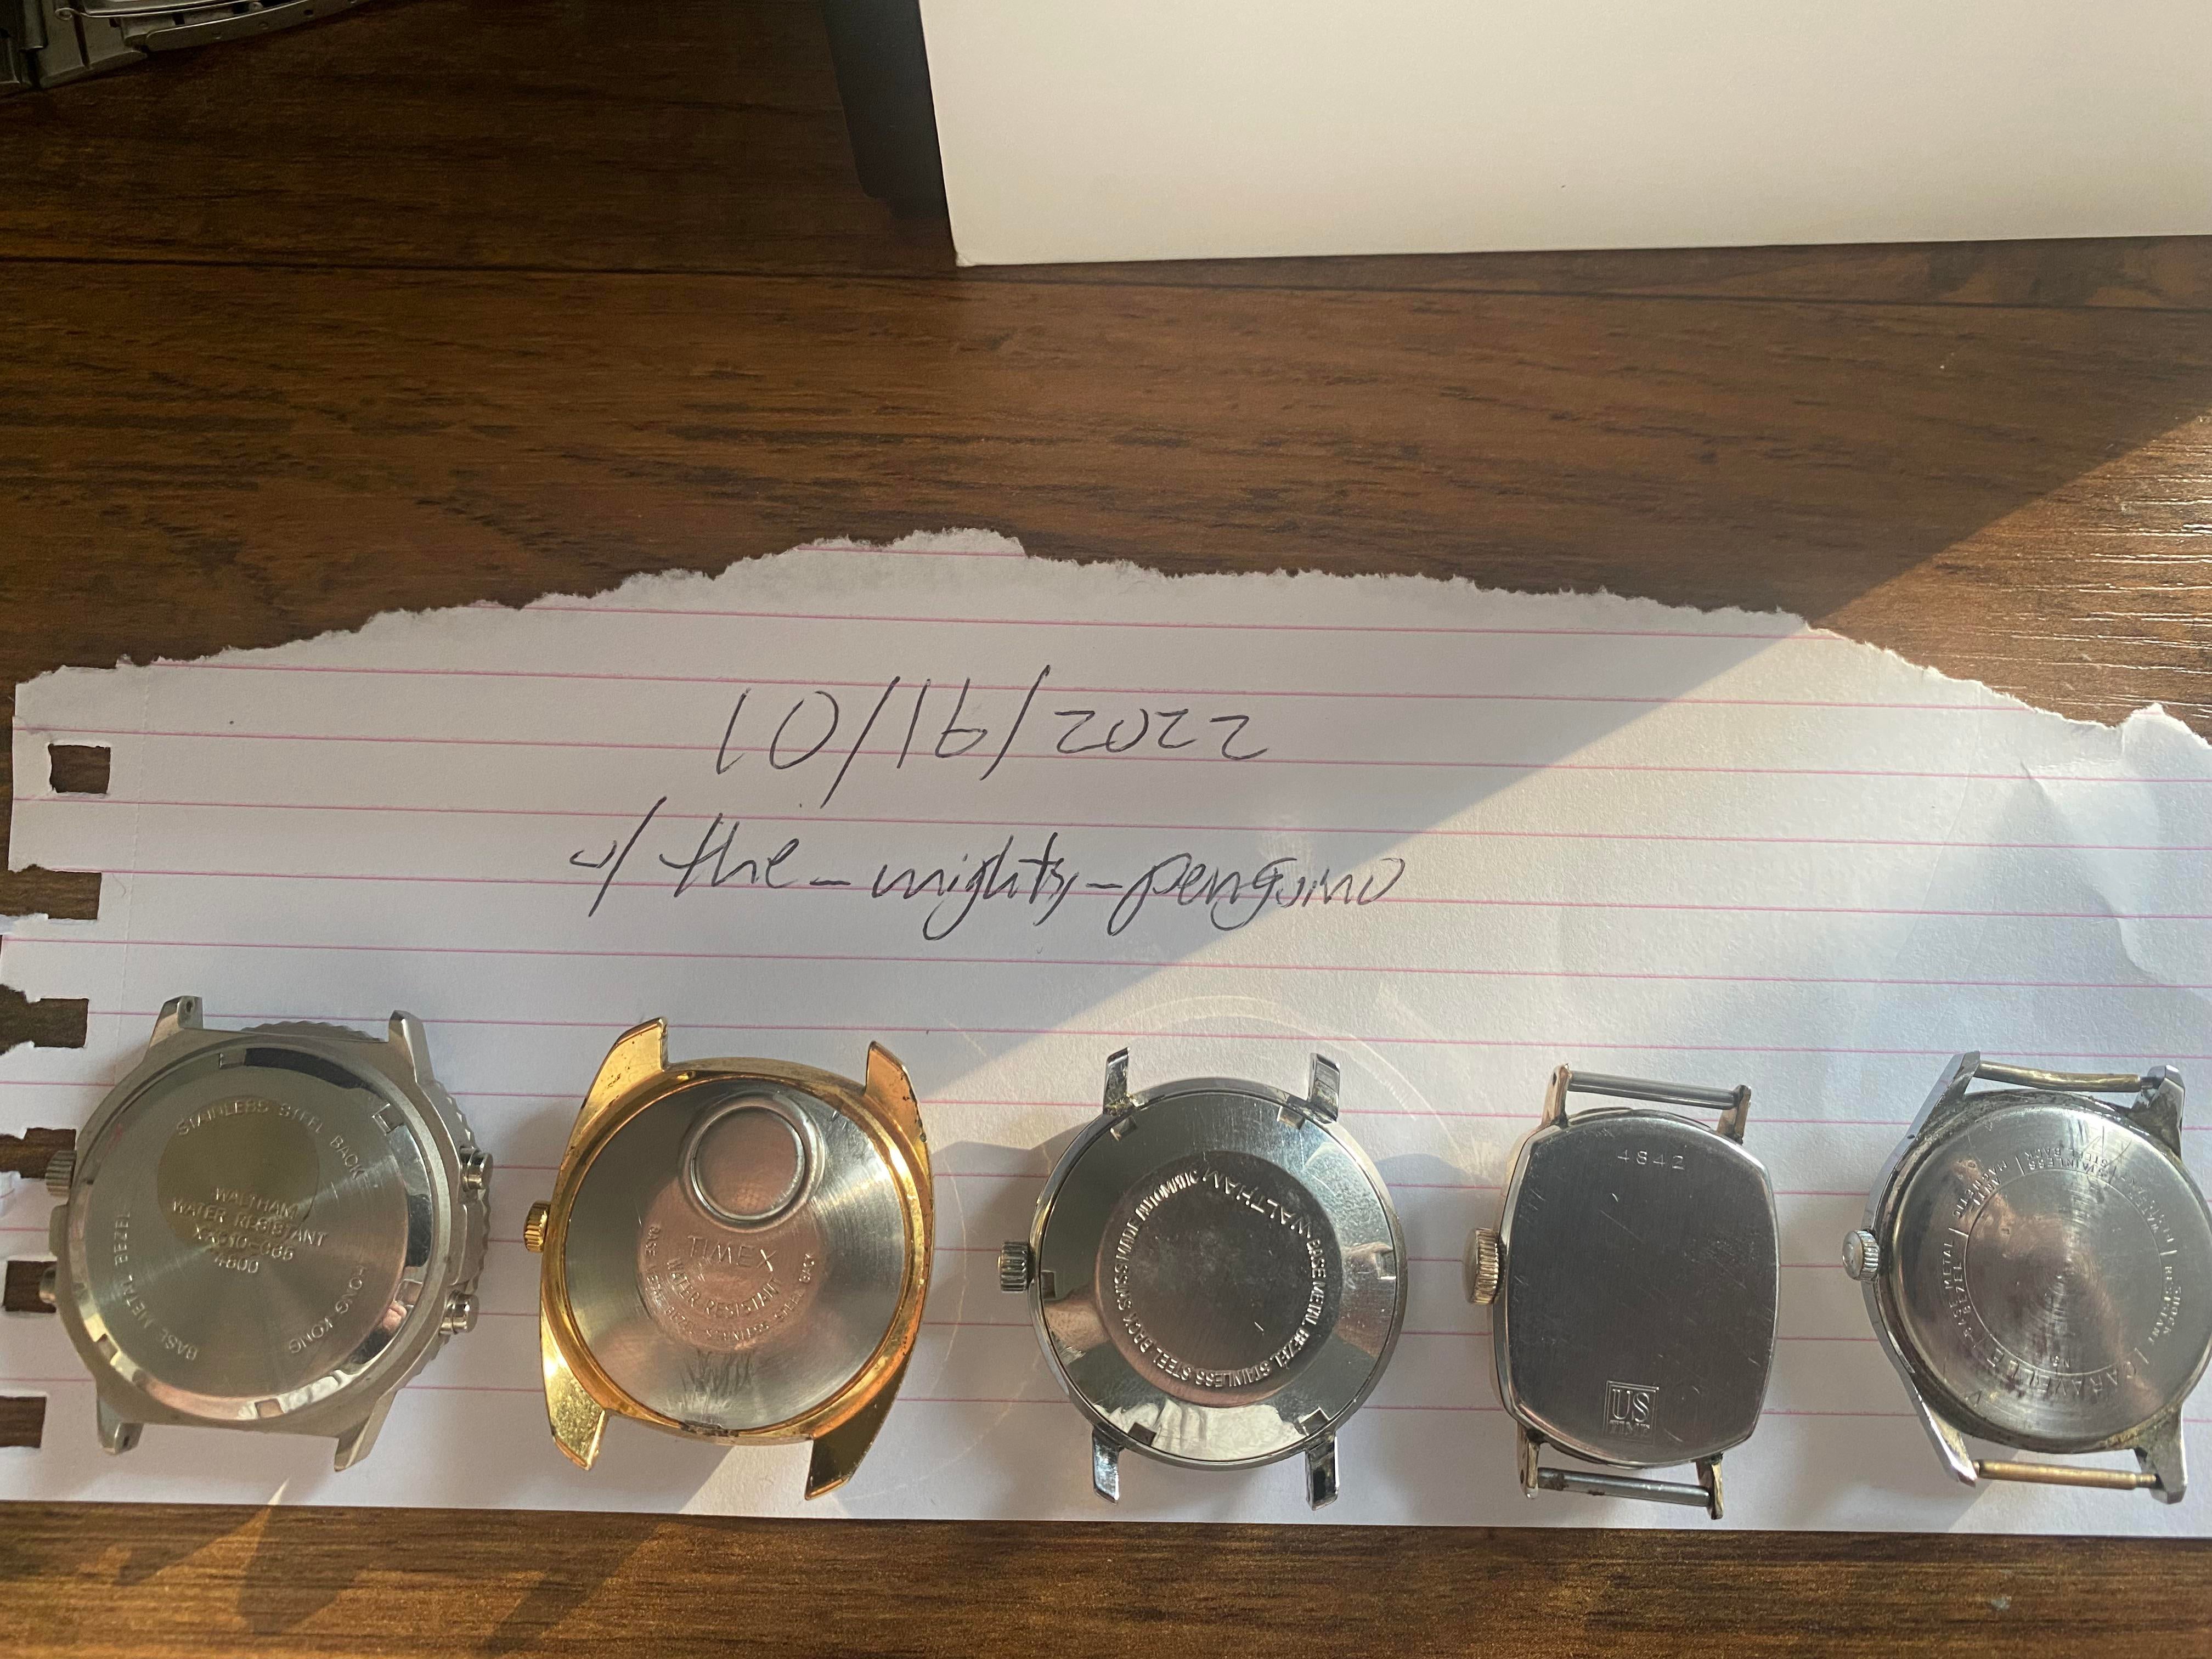 WTS] Vintage Watches for Parts/Repair (Waltham, Caravelle